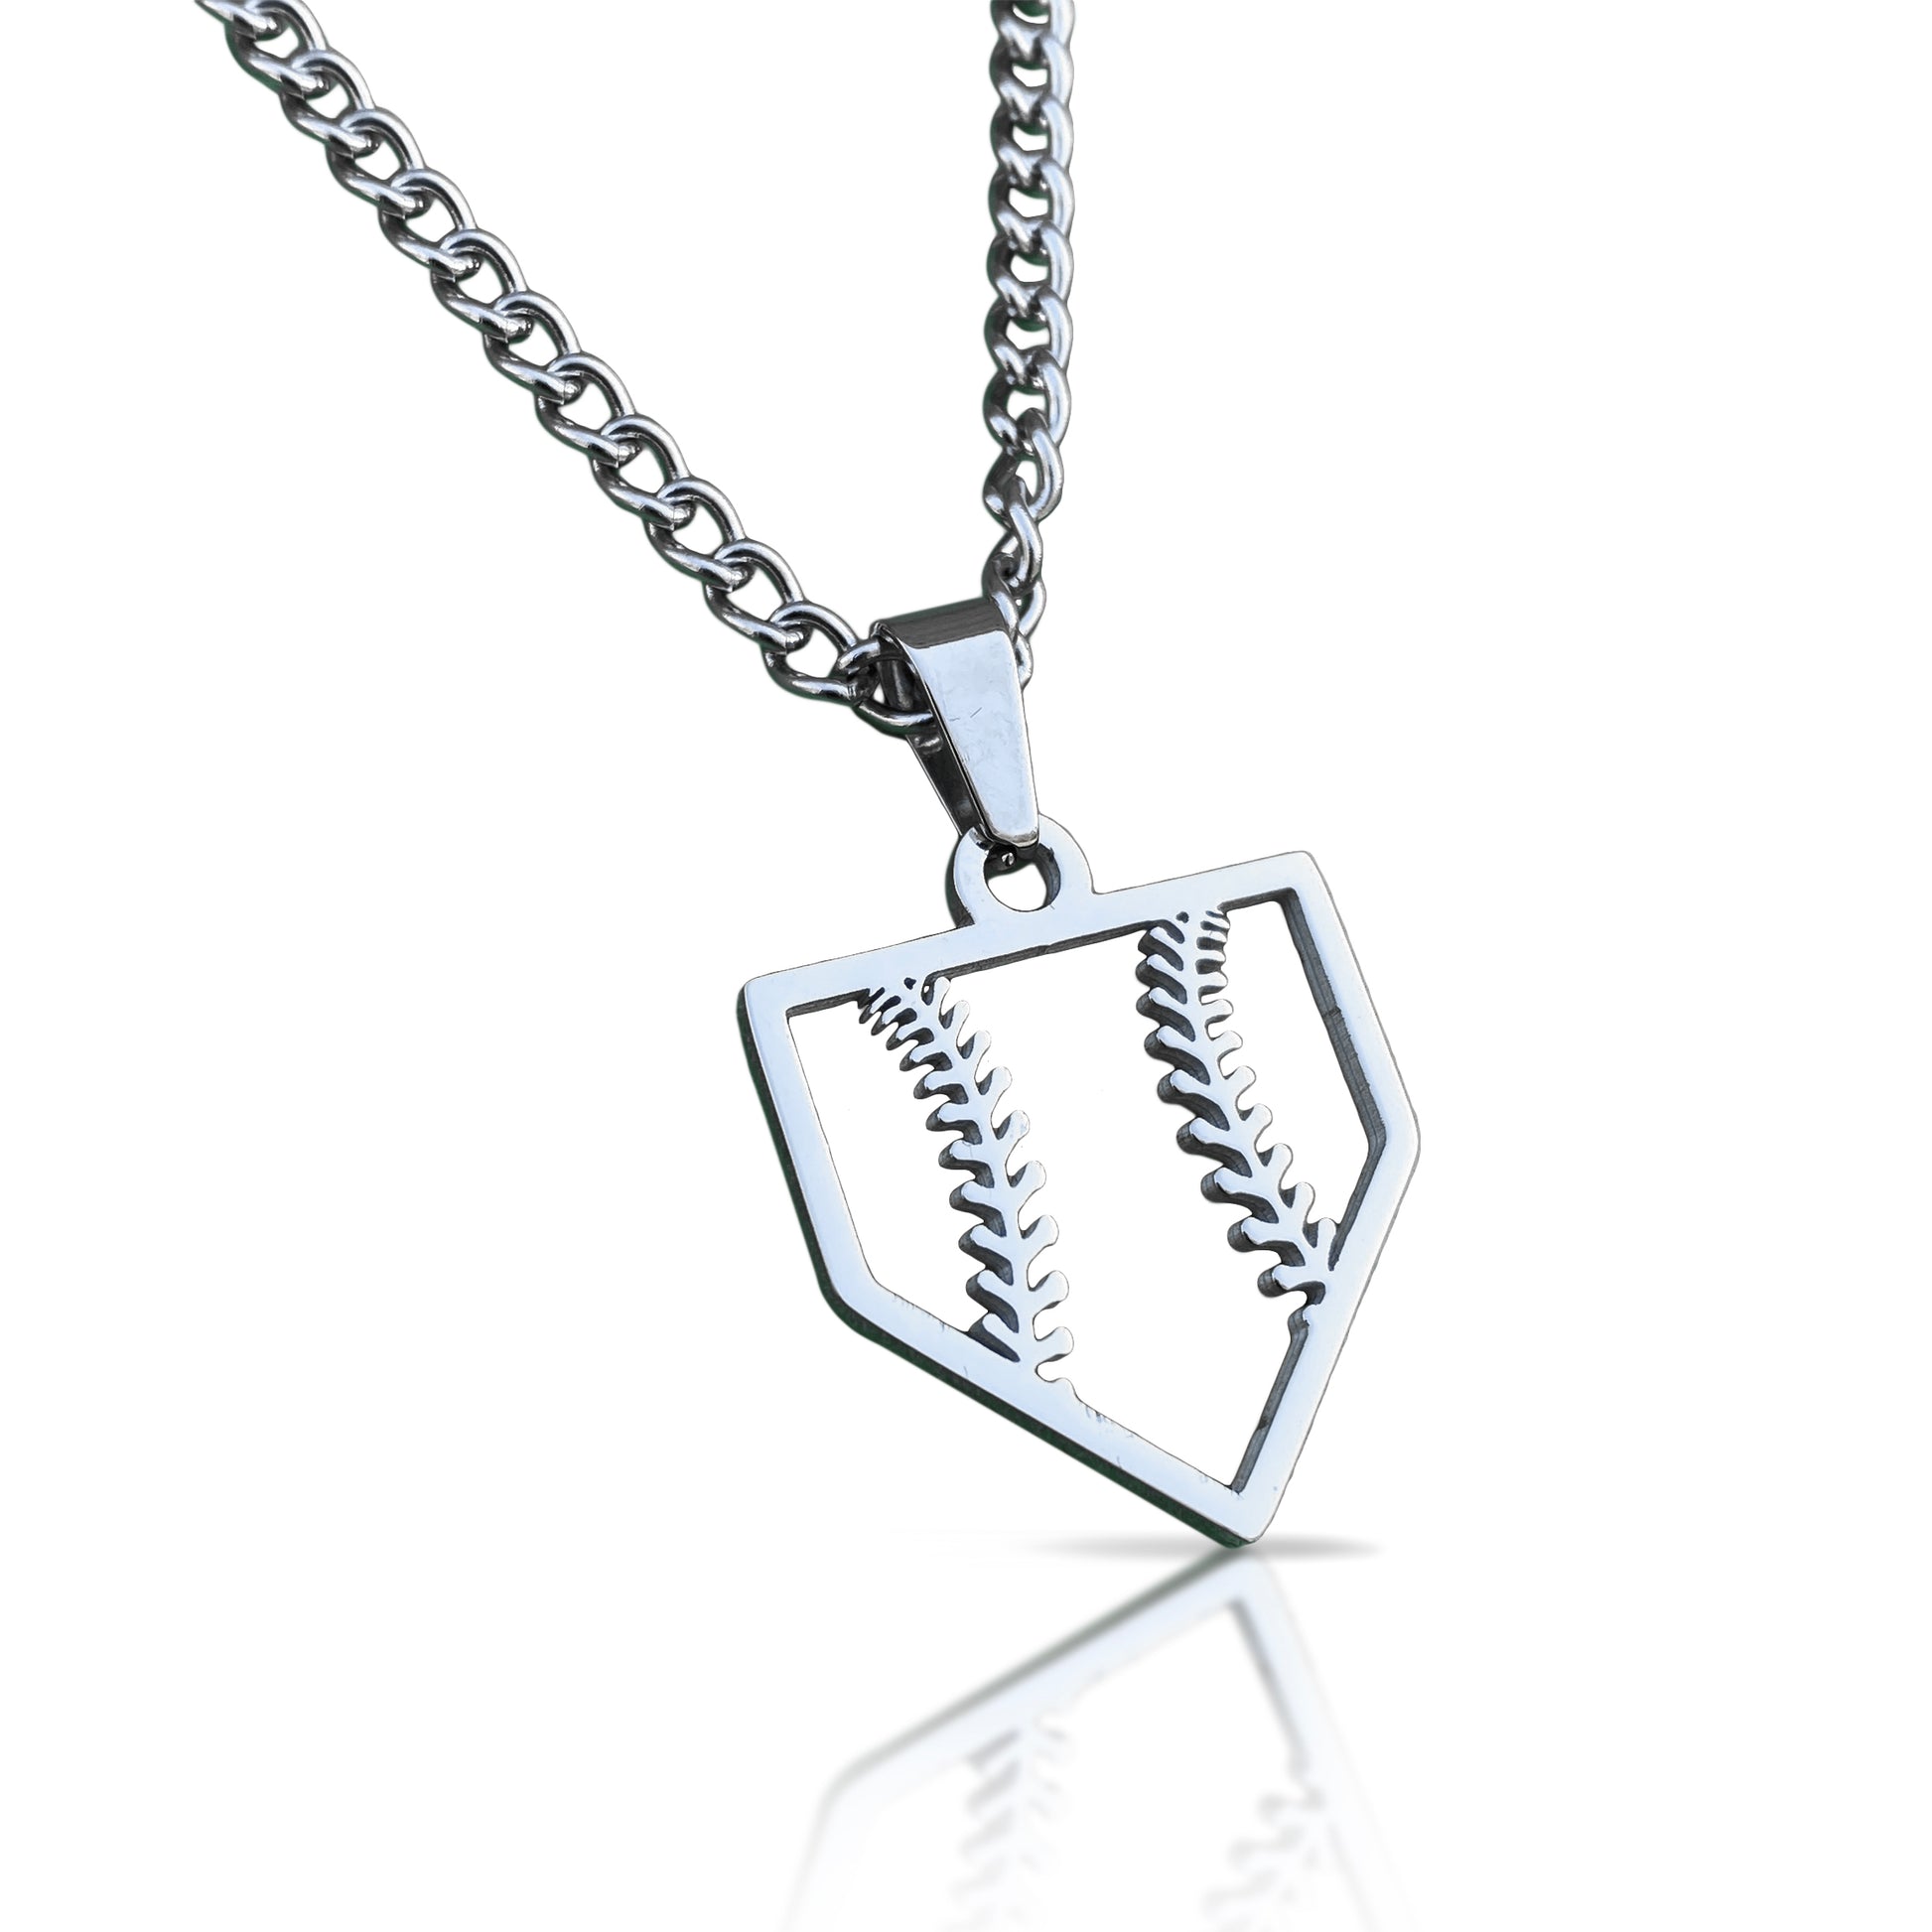 Home Plate Pendant With Chain Necklace - Stainless Steel